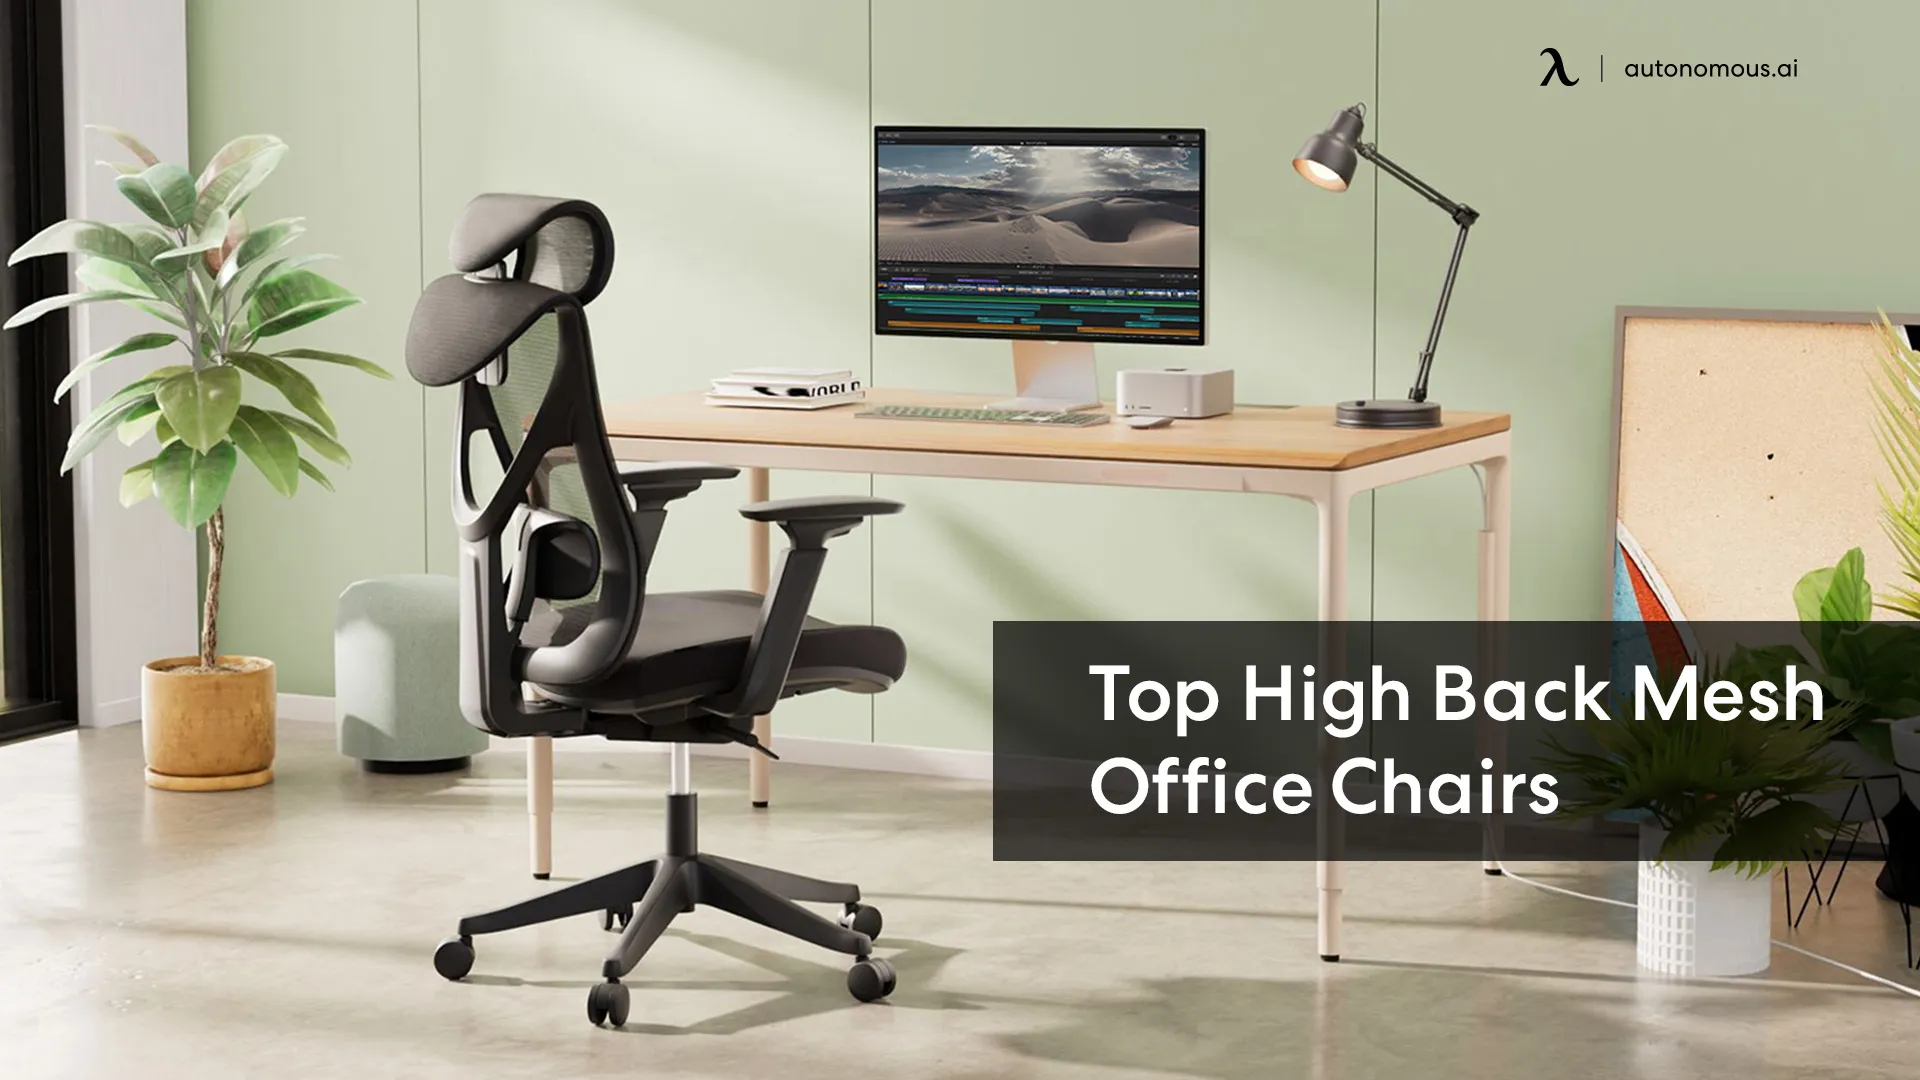 Top High Back Mesh Office Chairs for Comfortable Sitting